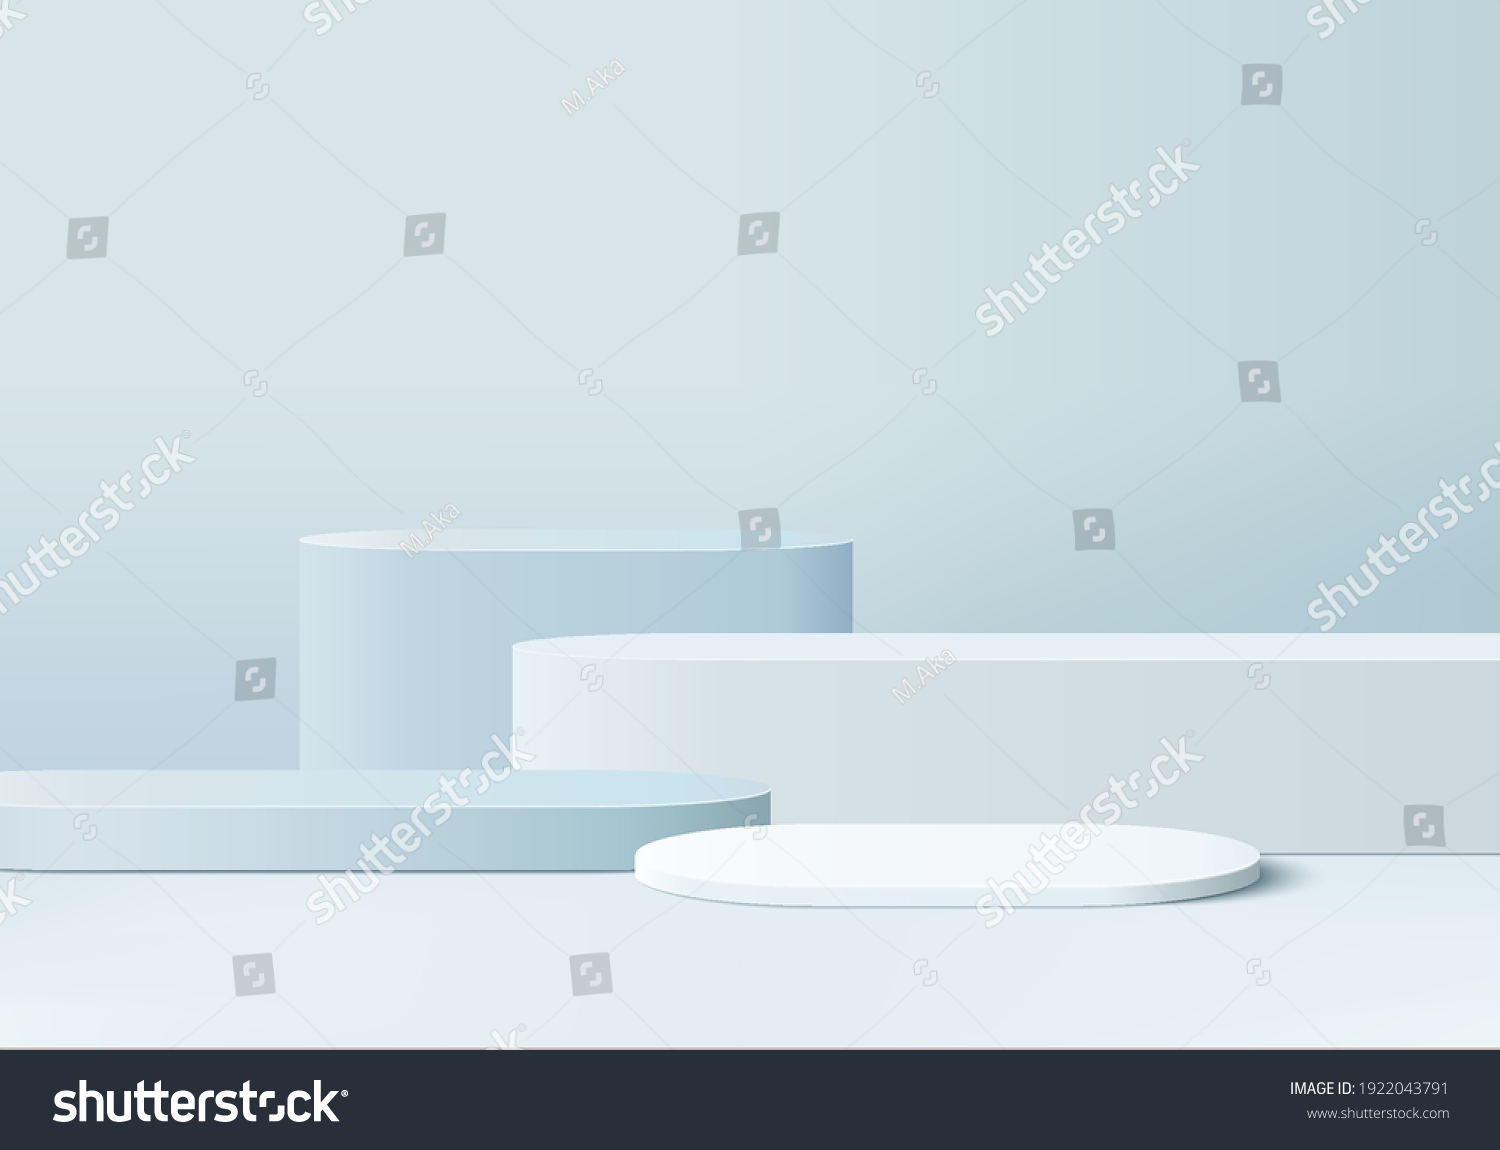 products display 3d background podium scene with shape geometric platform. background vector 3d rendering with podium. display to show cosmetic products. Stage showcase on pedestal display blue studio #1922043791